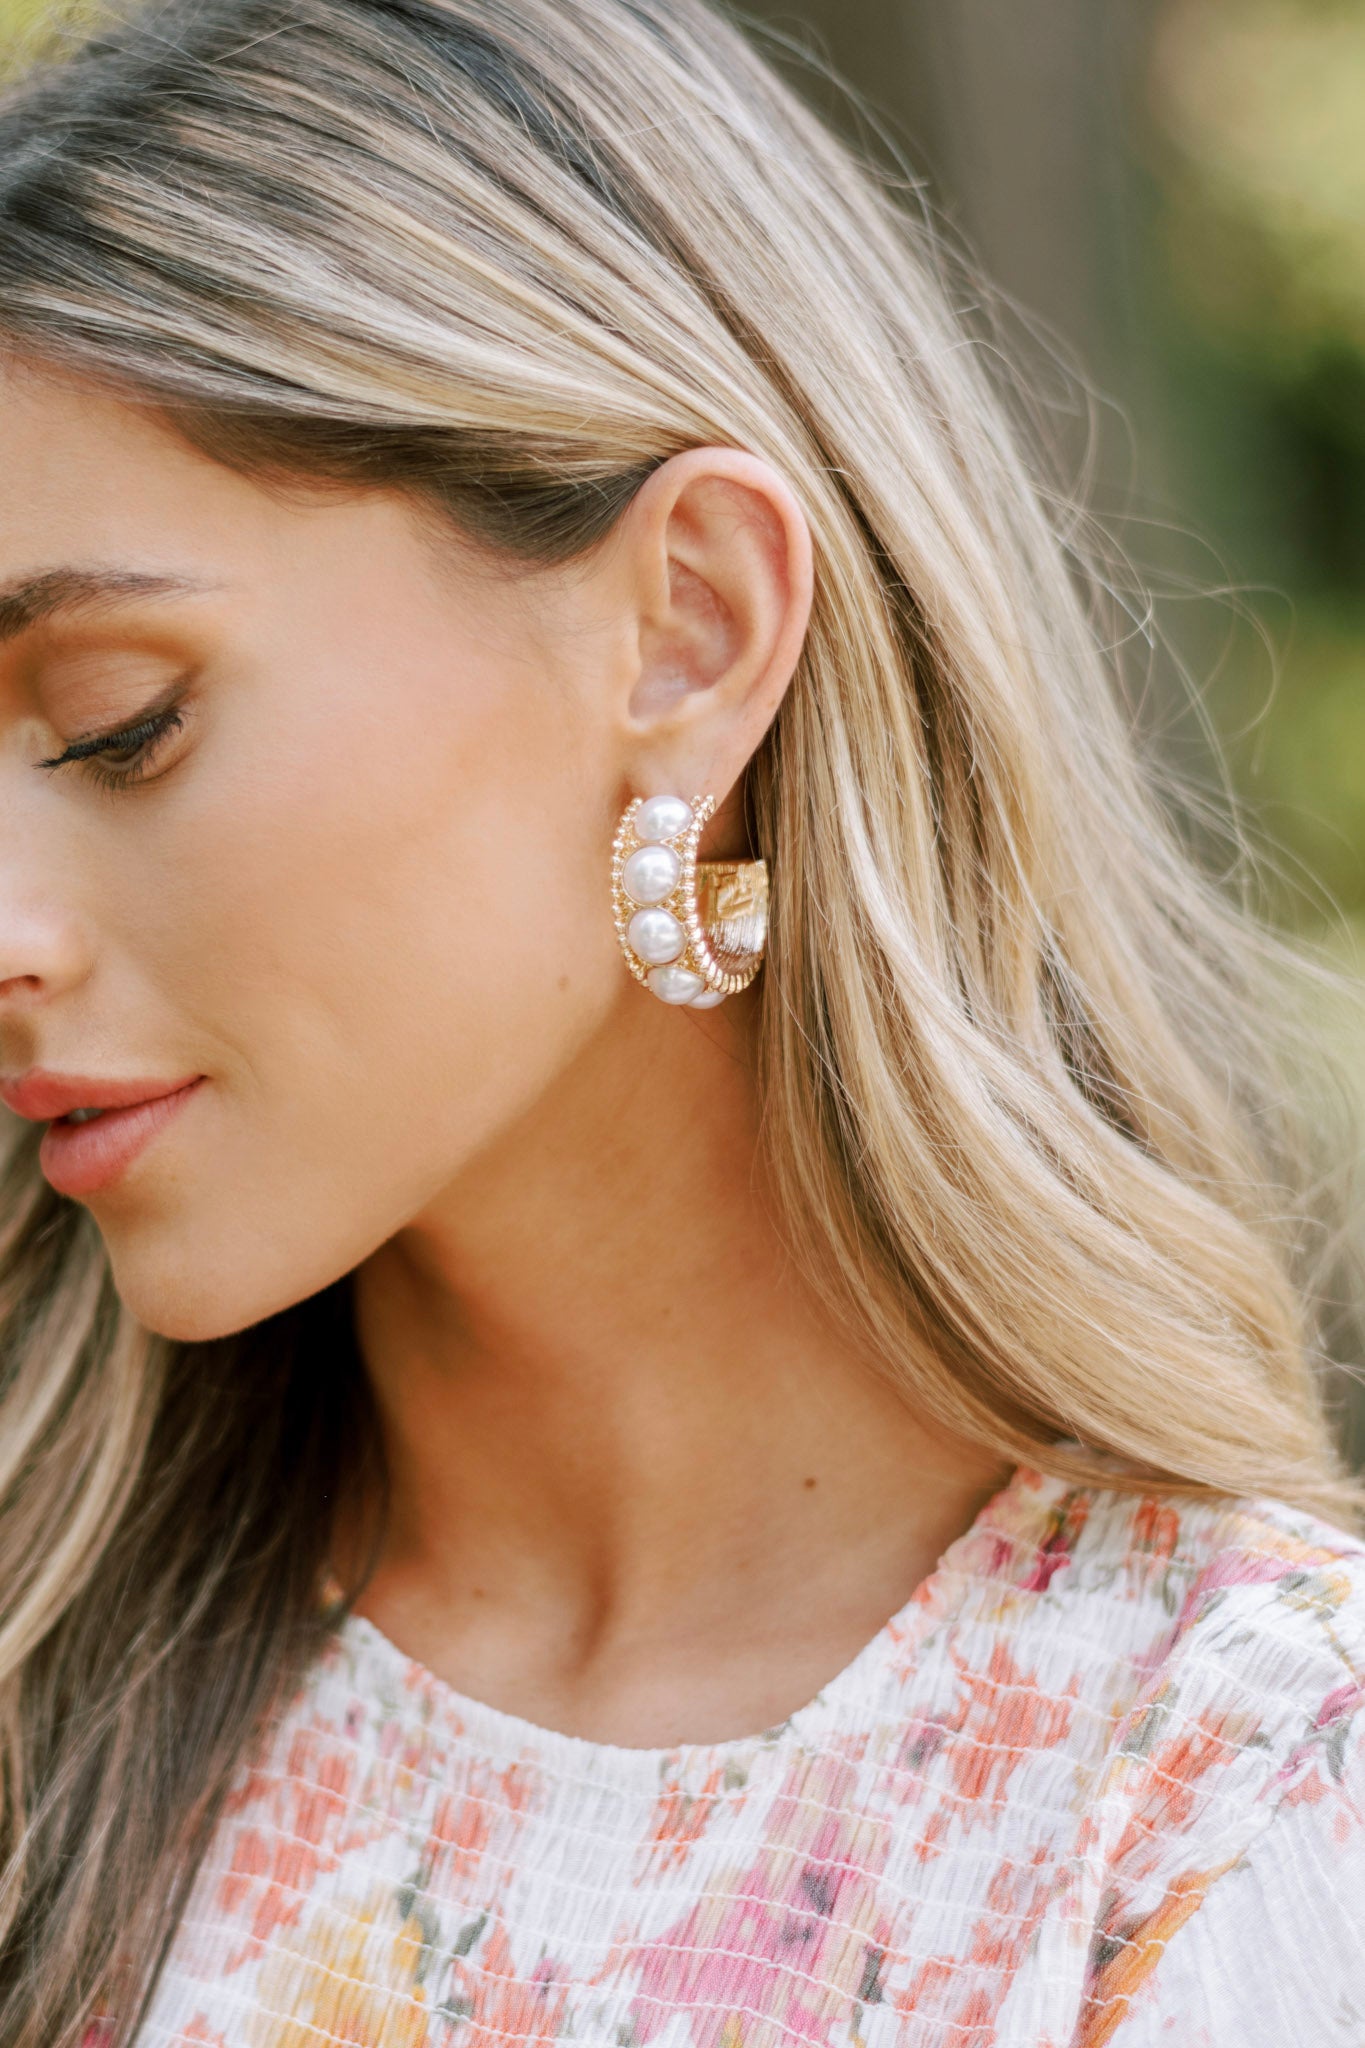 These gold pearl earrings feature gold hardware, a chunky hoop design with evenly spaced pearl embellishments, and a secure post backings.